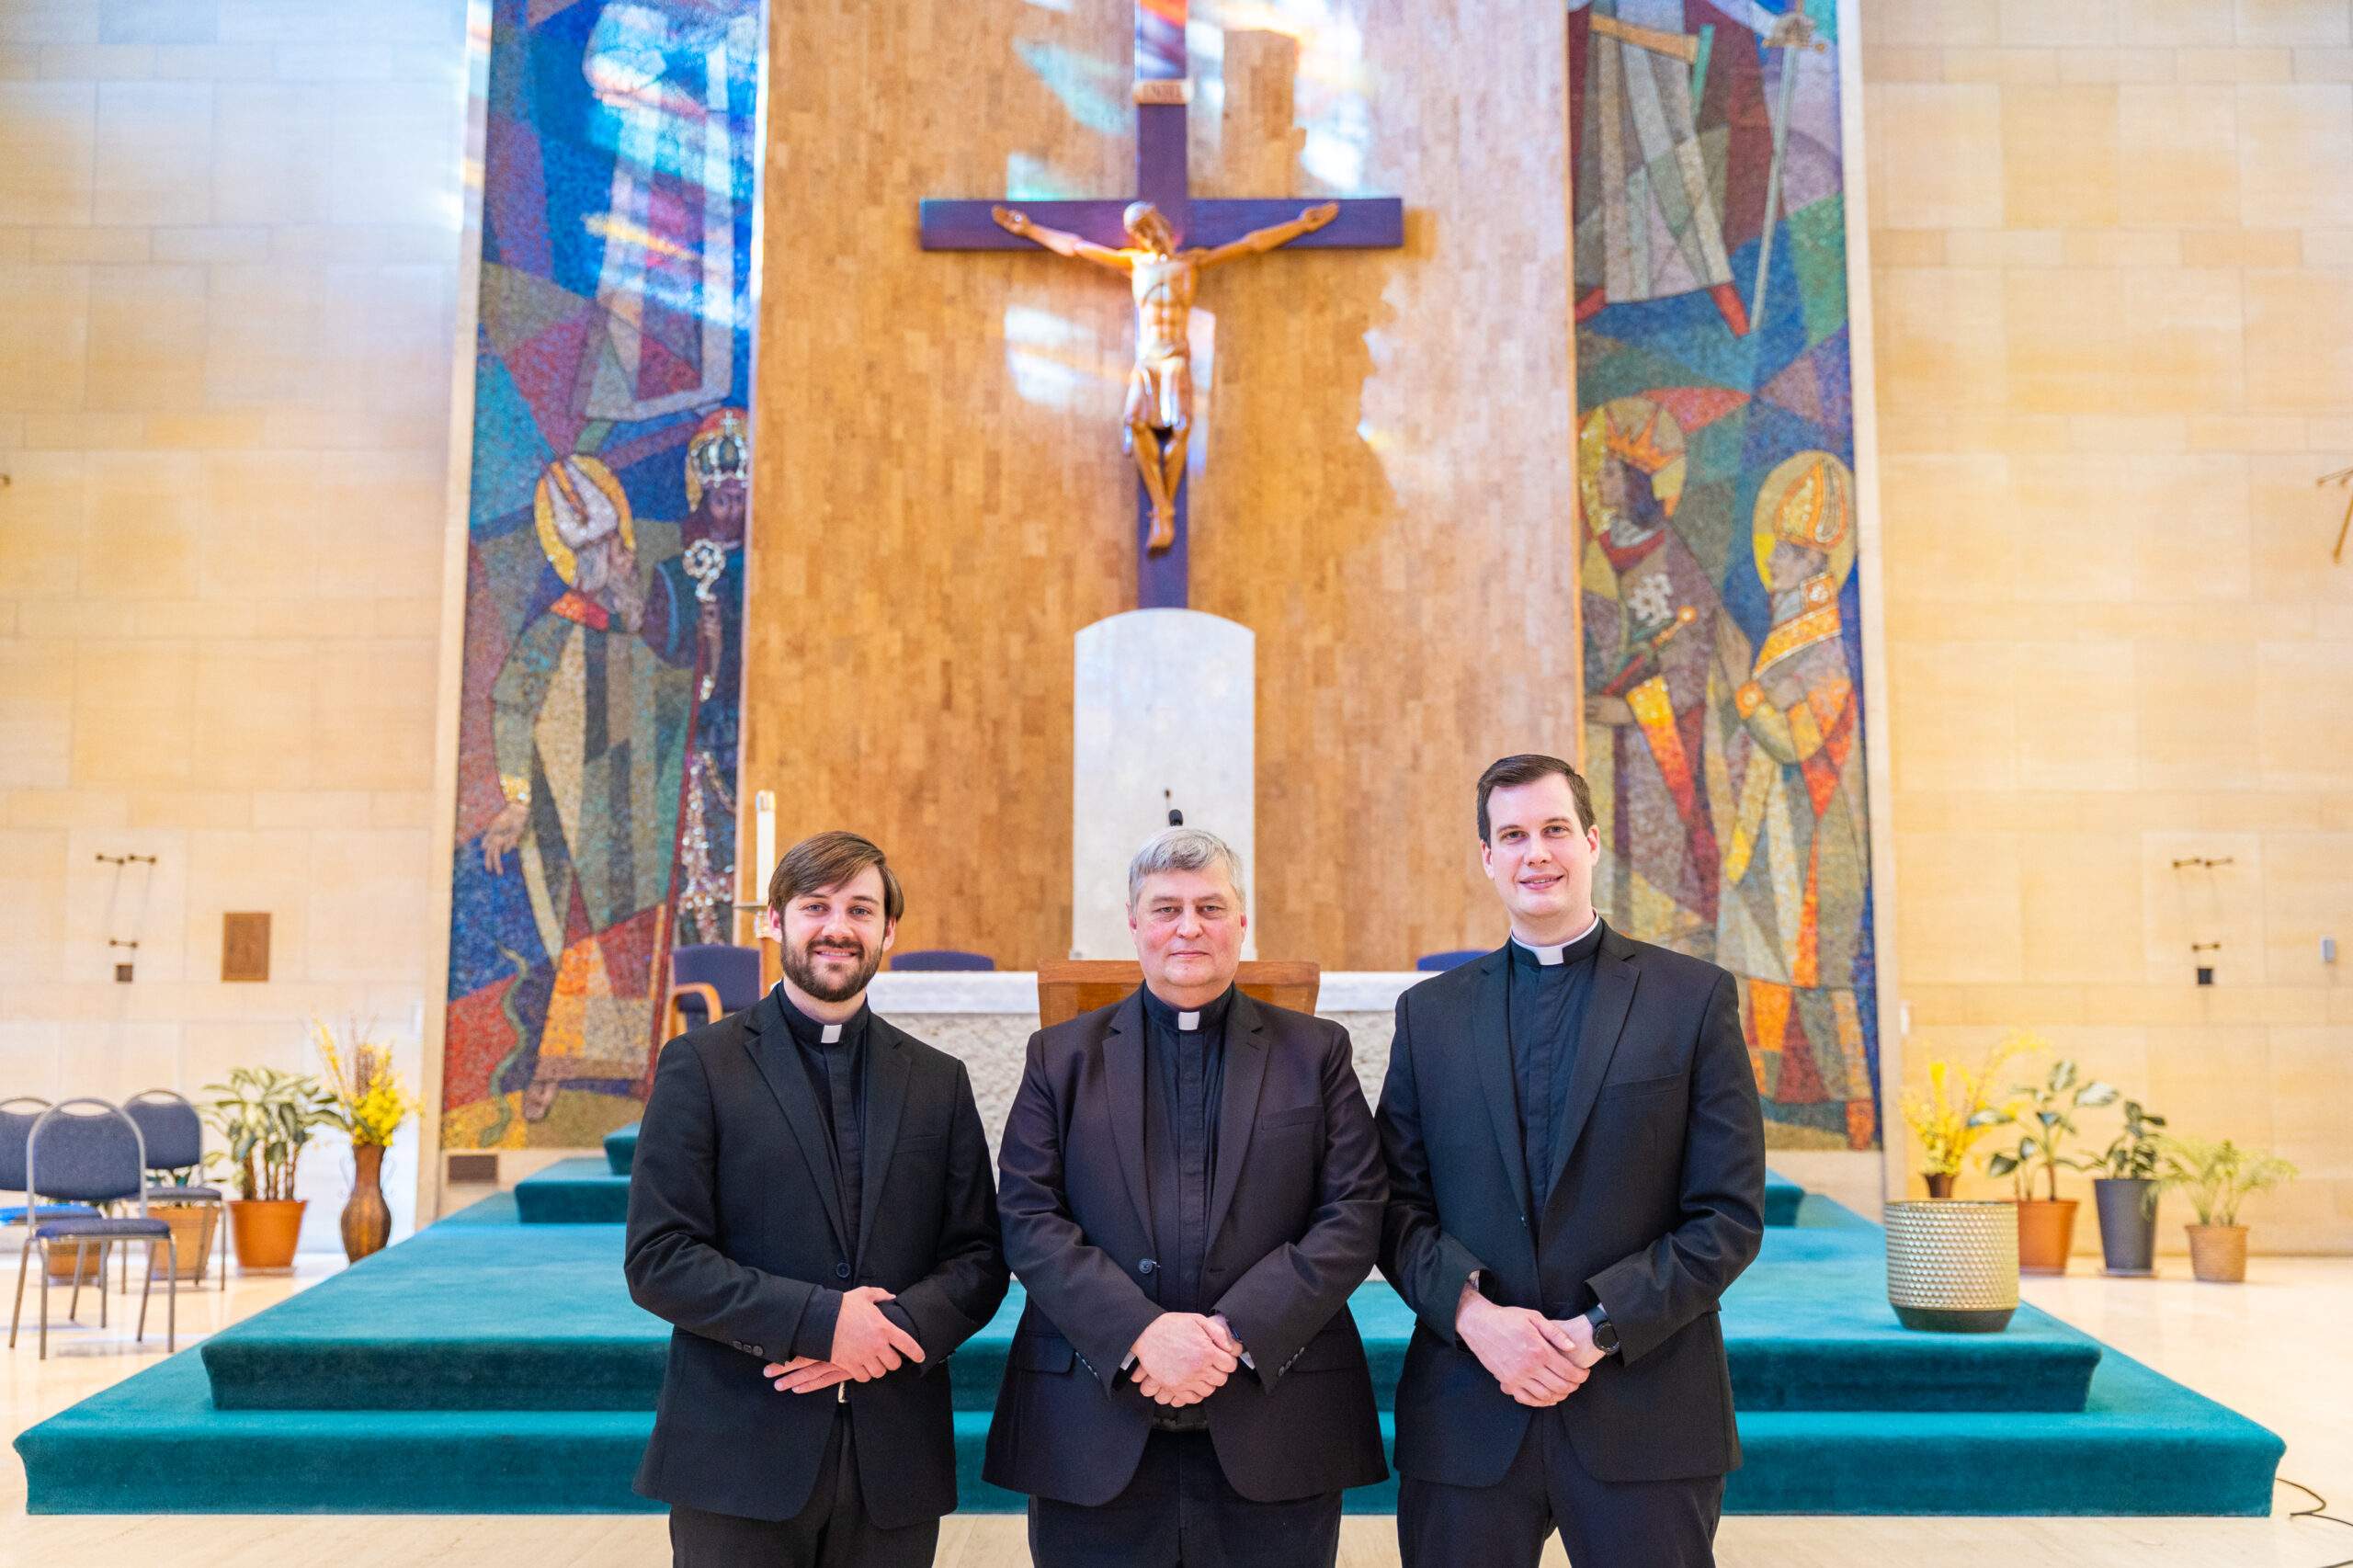 Meet Our Newly-Ordained Priests